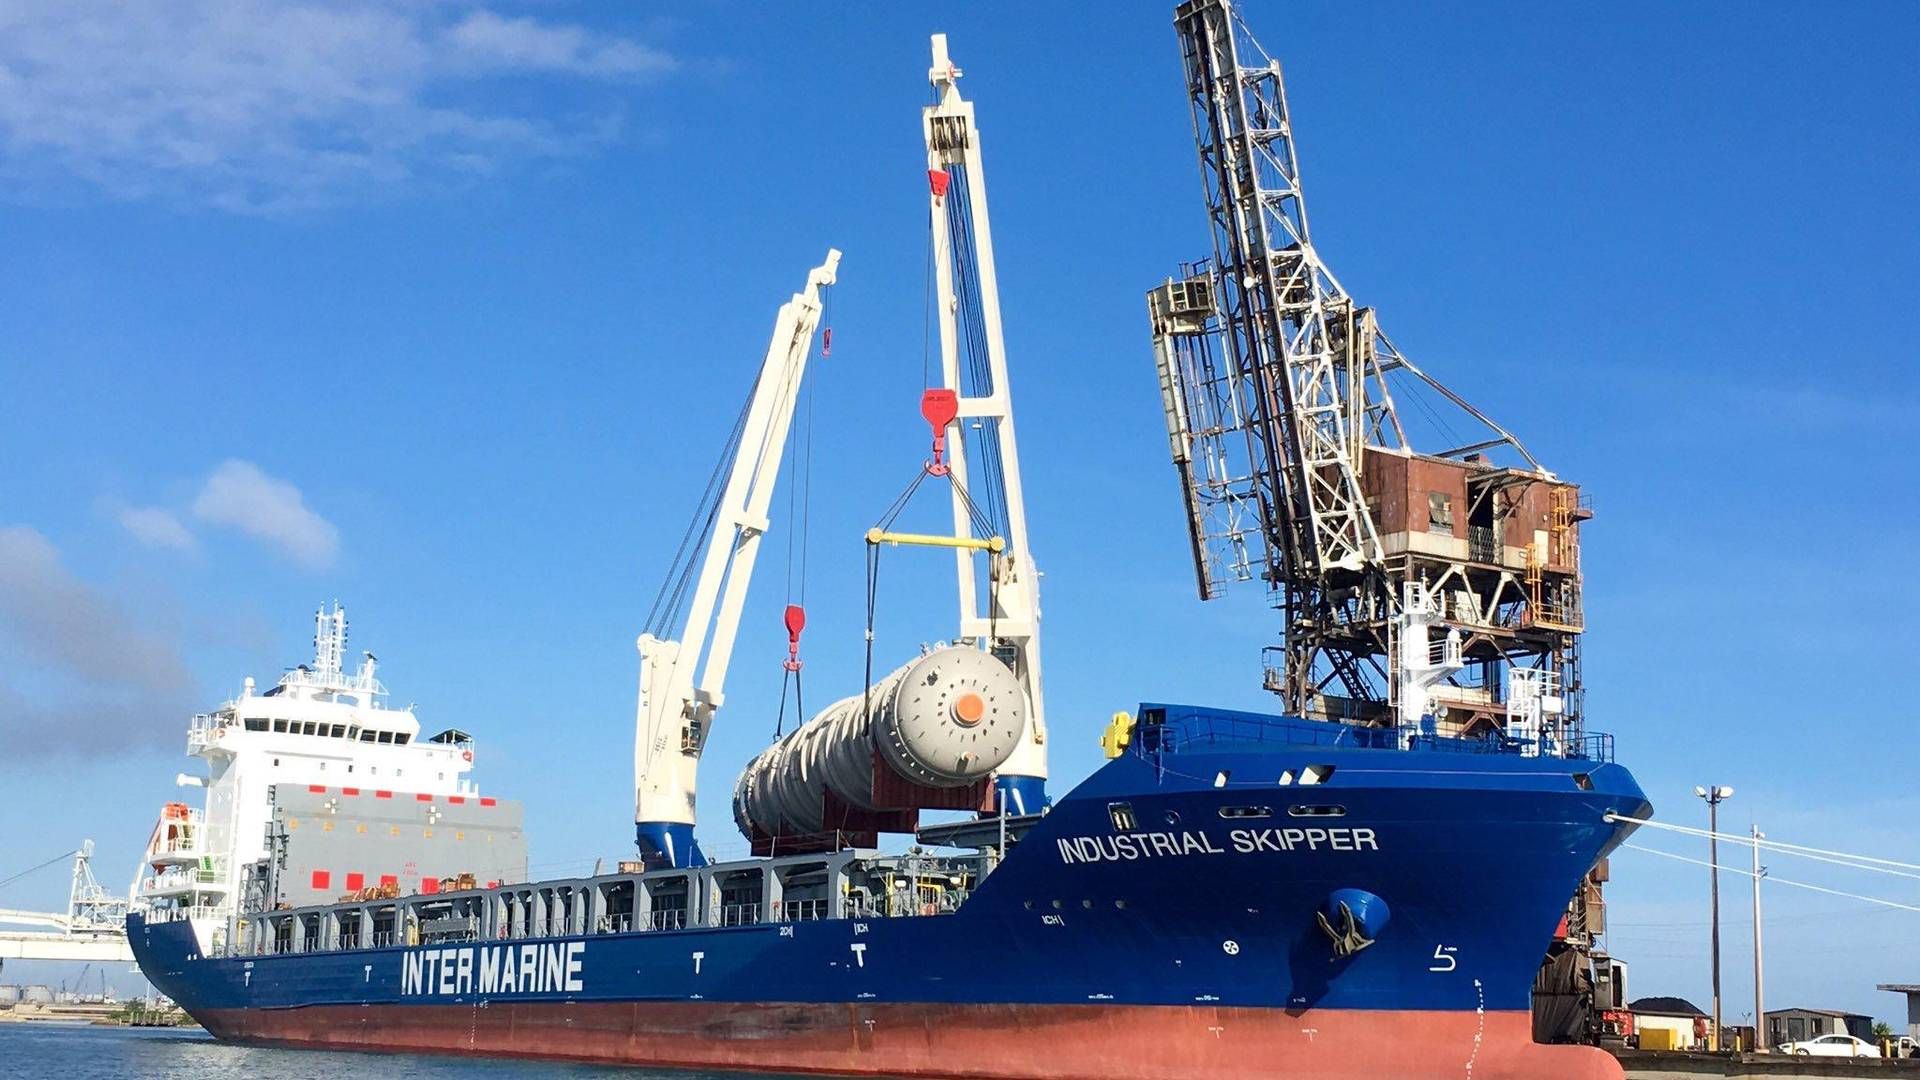 The "Industrial Skipper" is one of four chartered multipurpose vessels that the specialist shipping company, Intermarine, will soon be able to put into service. | Photo: Harren Group